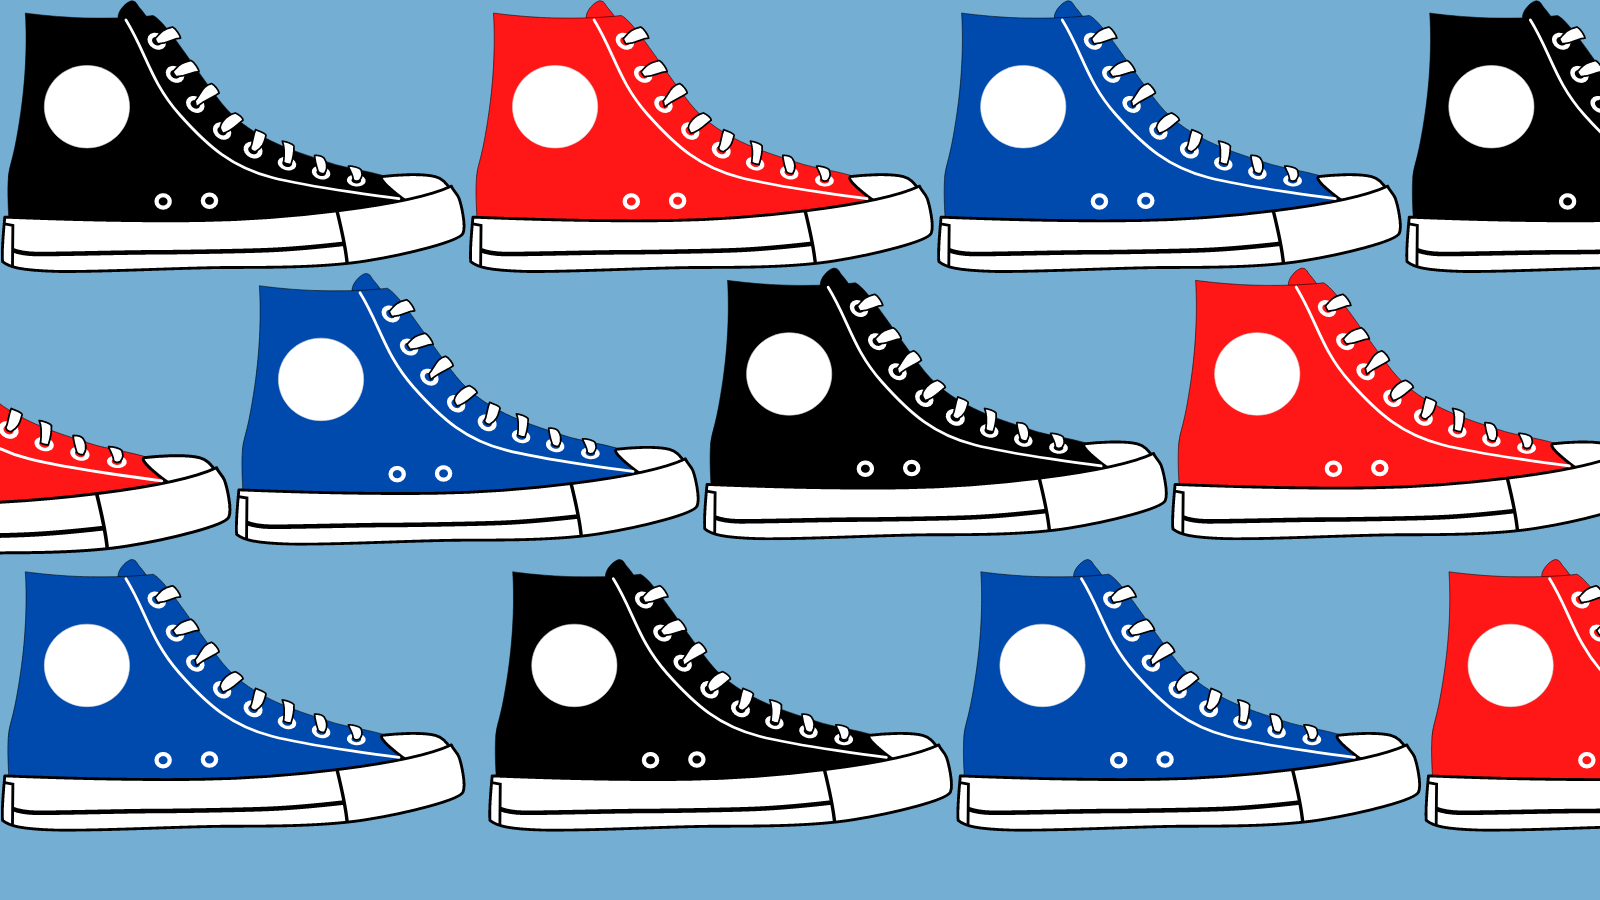 Rows of canvas sneakers in black, red, and blue